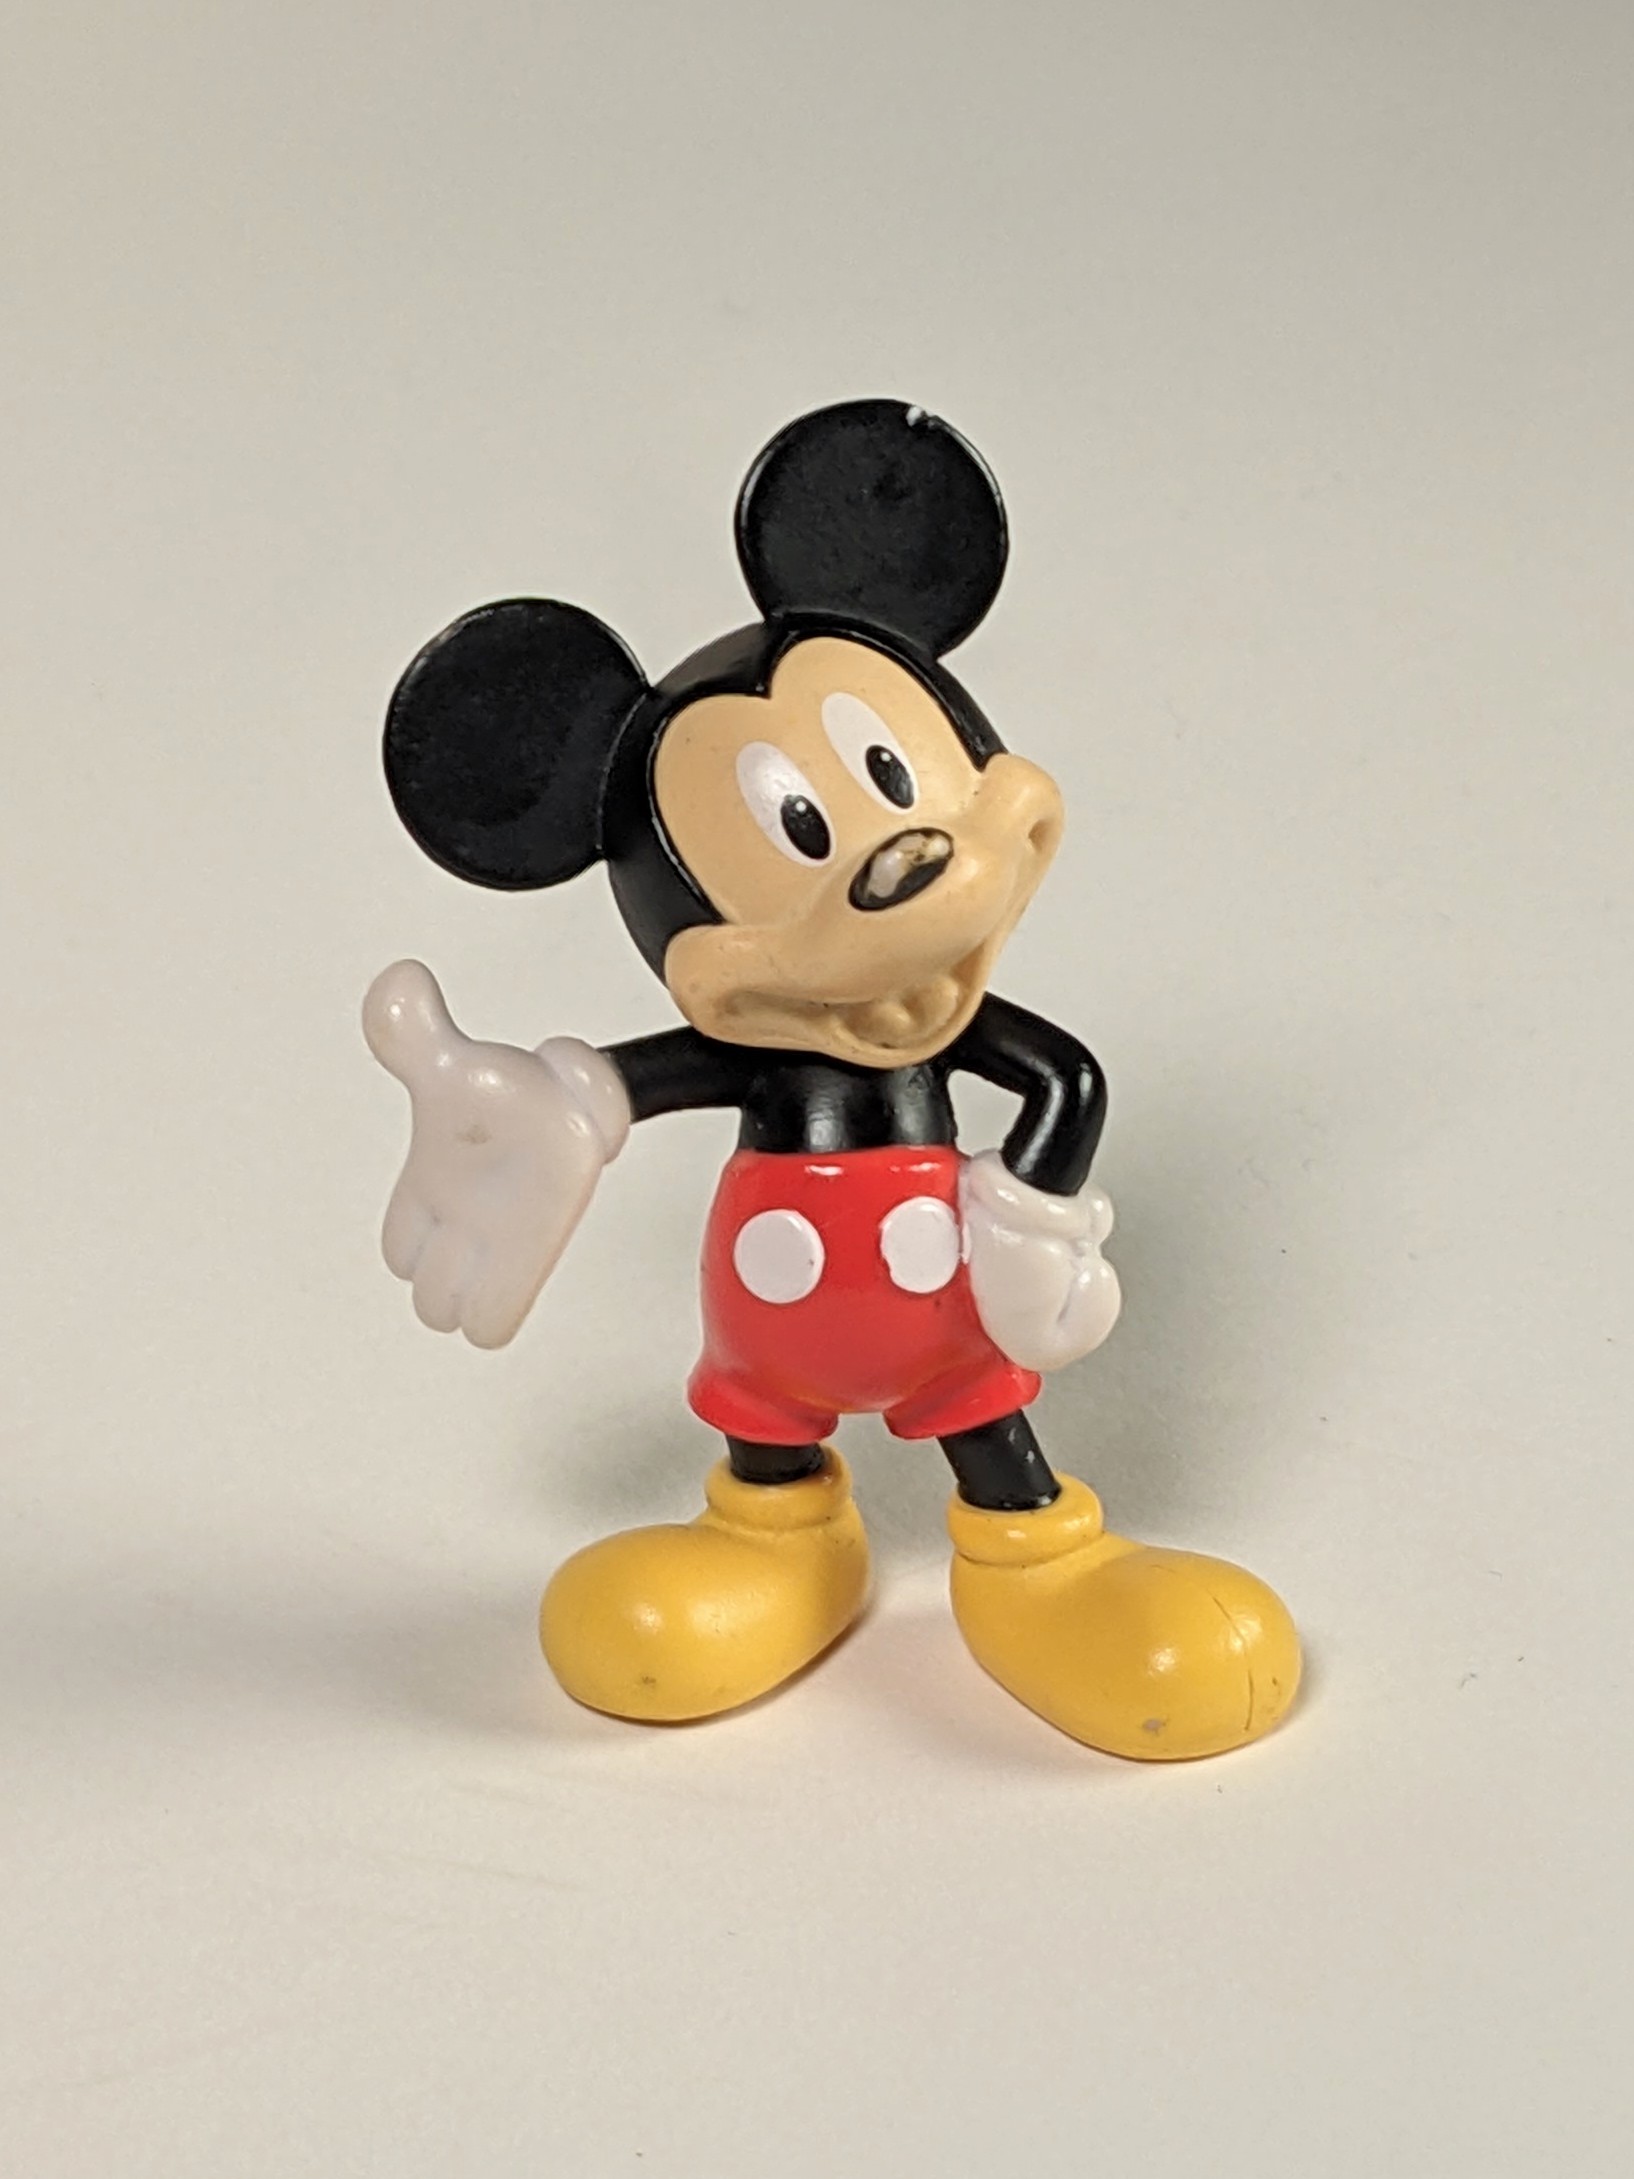 Photo of a small Mickey Mouse statuette.